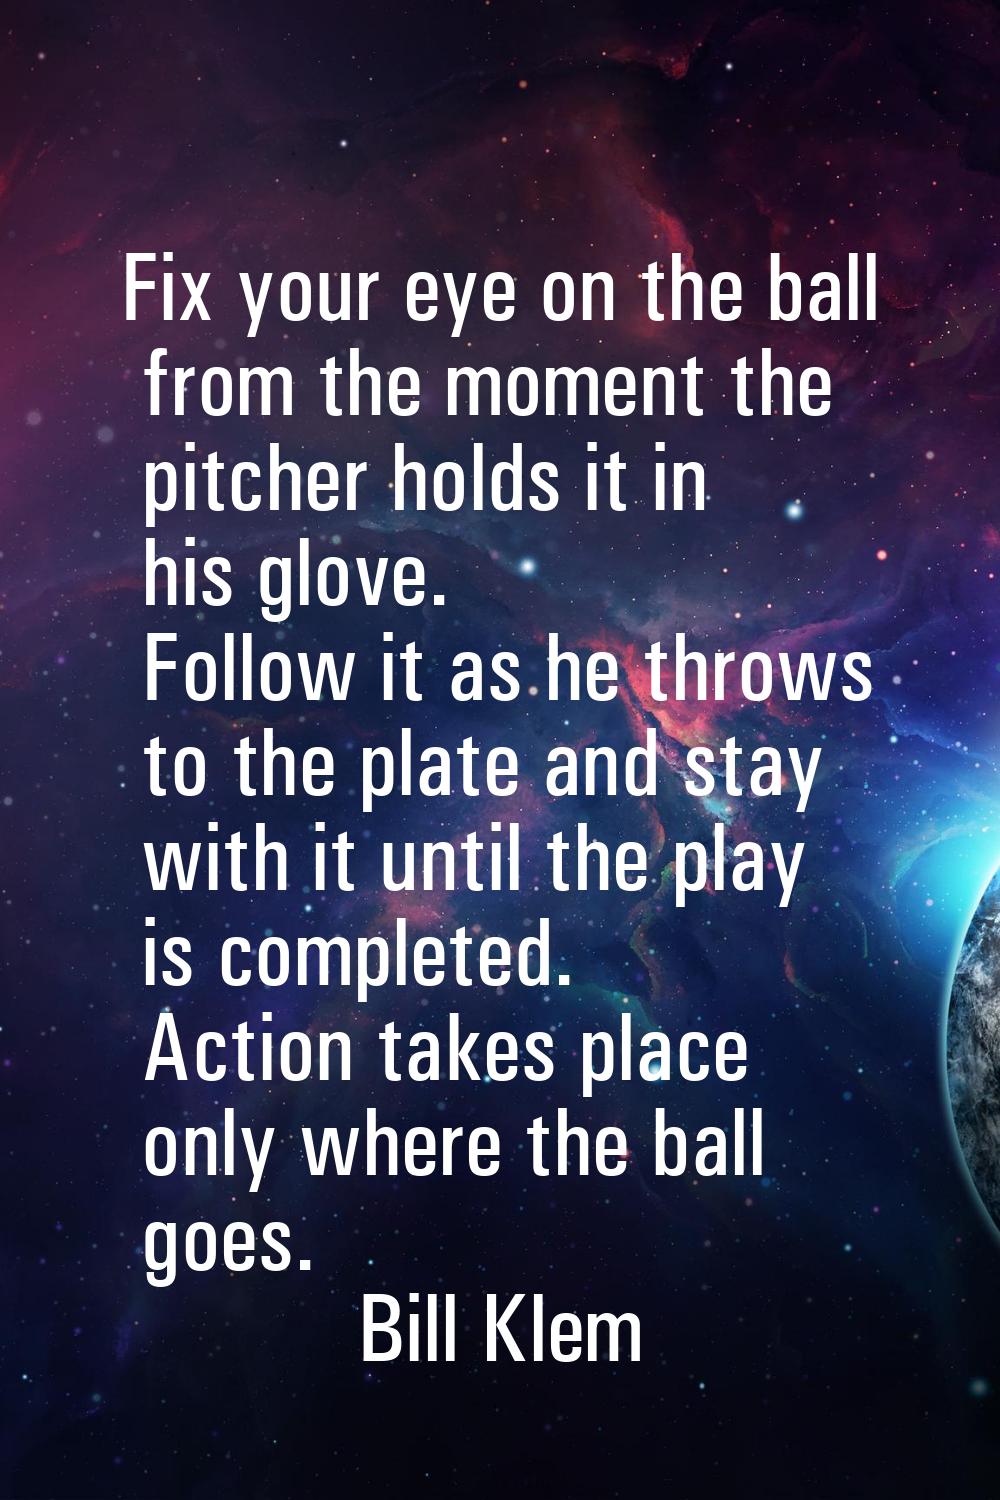 Fix your eye on the ball from the moment the pitcher holds it in his glove. Follow it as he throws 